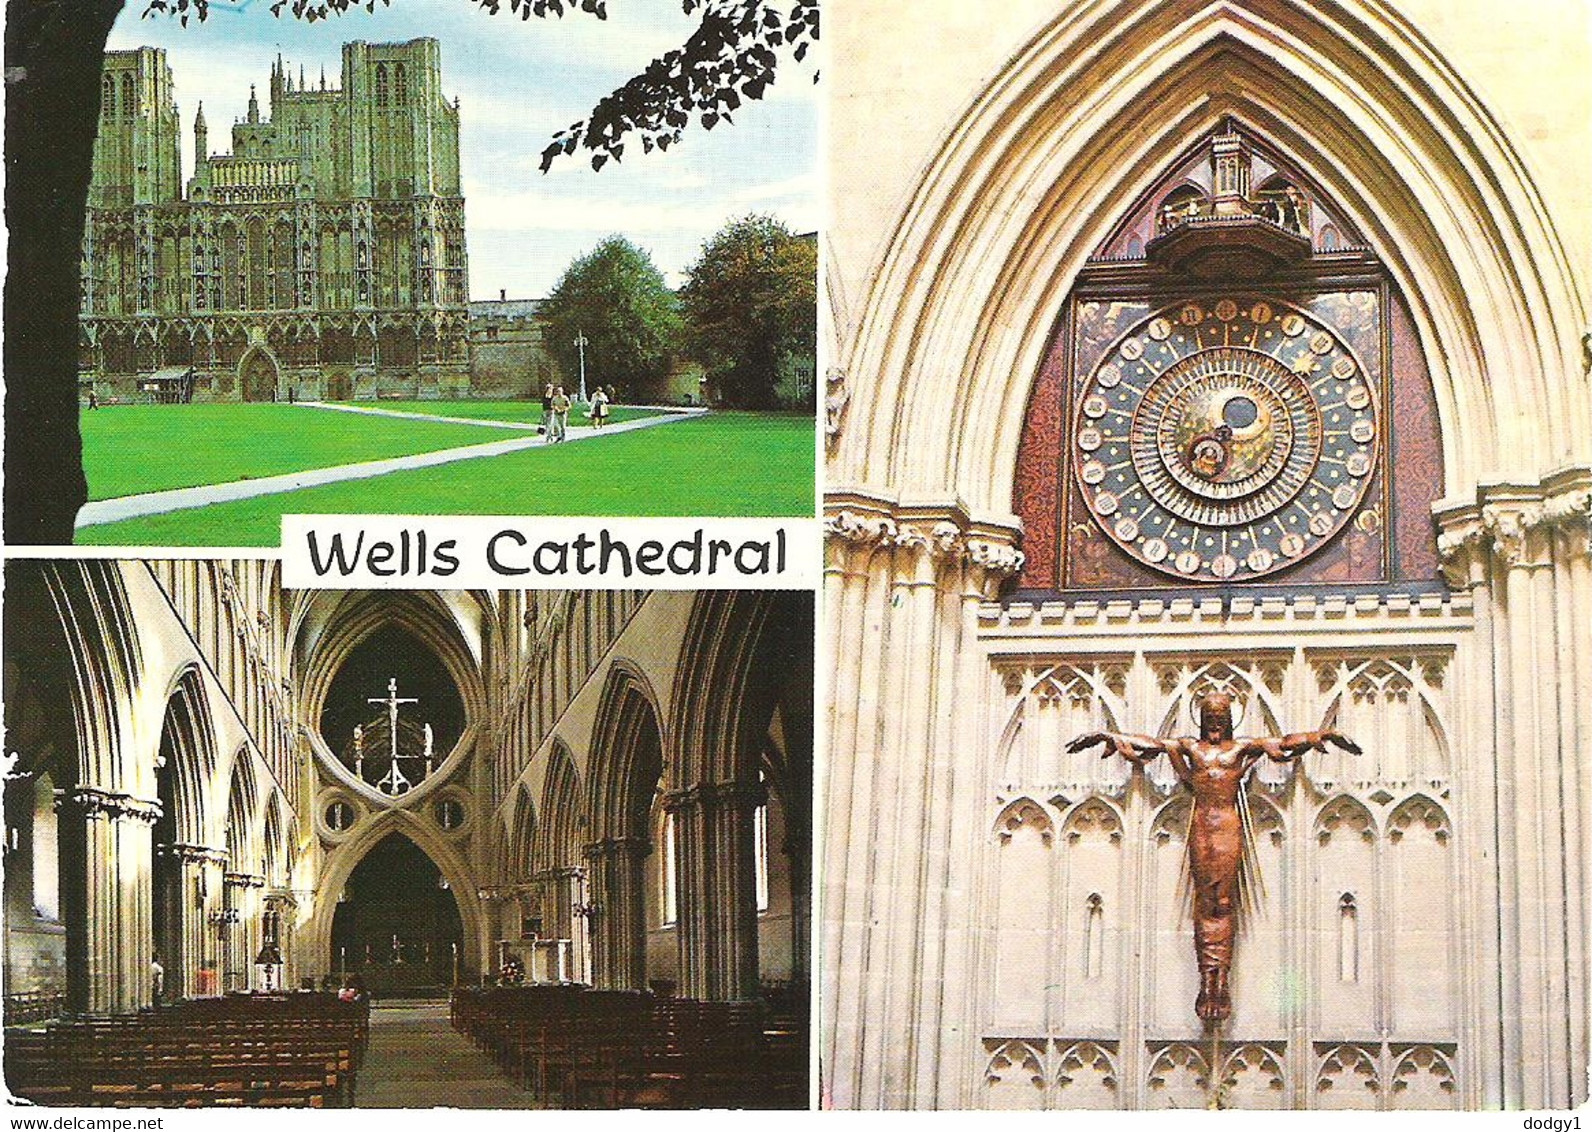 WELLS CATHEDRAL, WELLS, SOMERSET, ENGLAND. USED  POSTCARD Fq1 - Wells